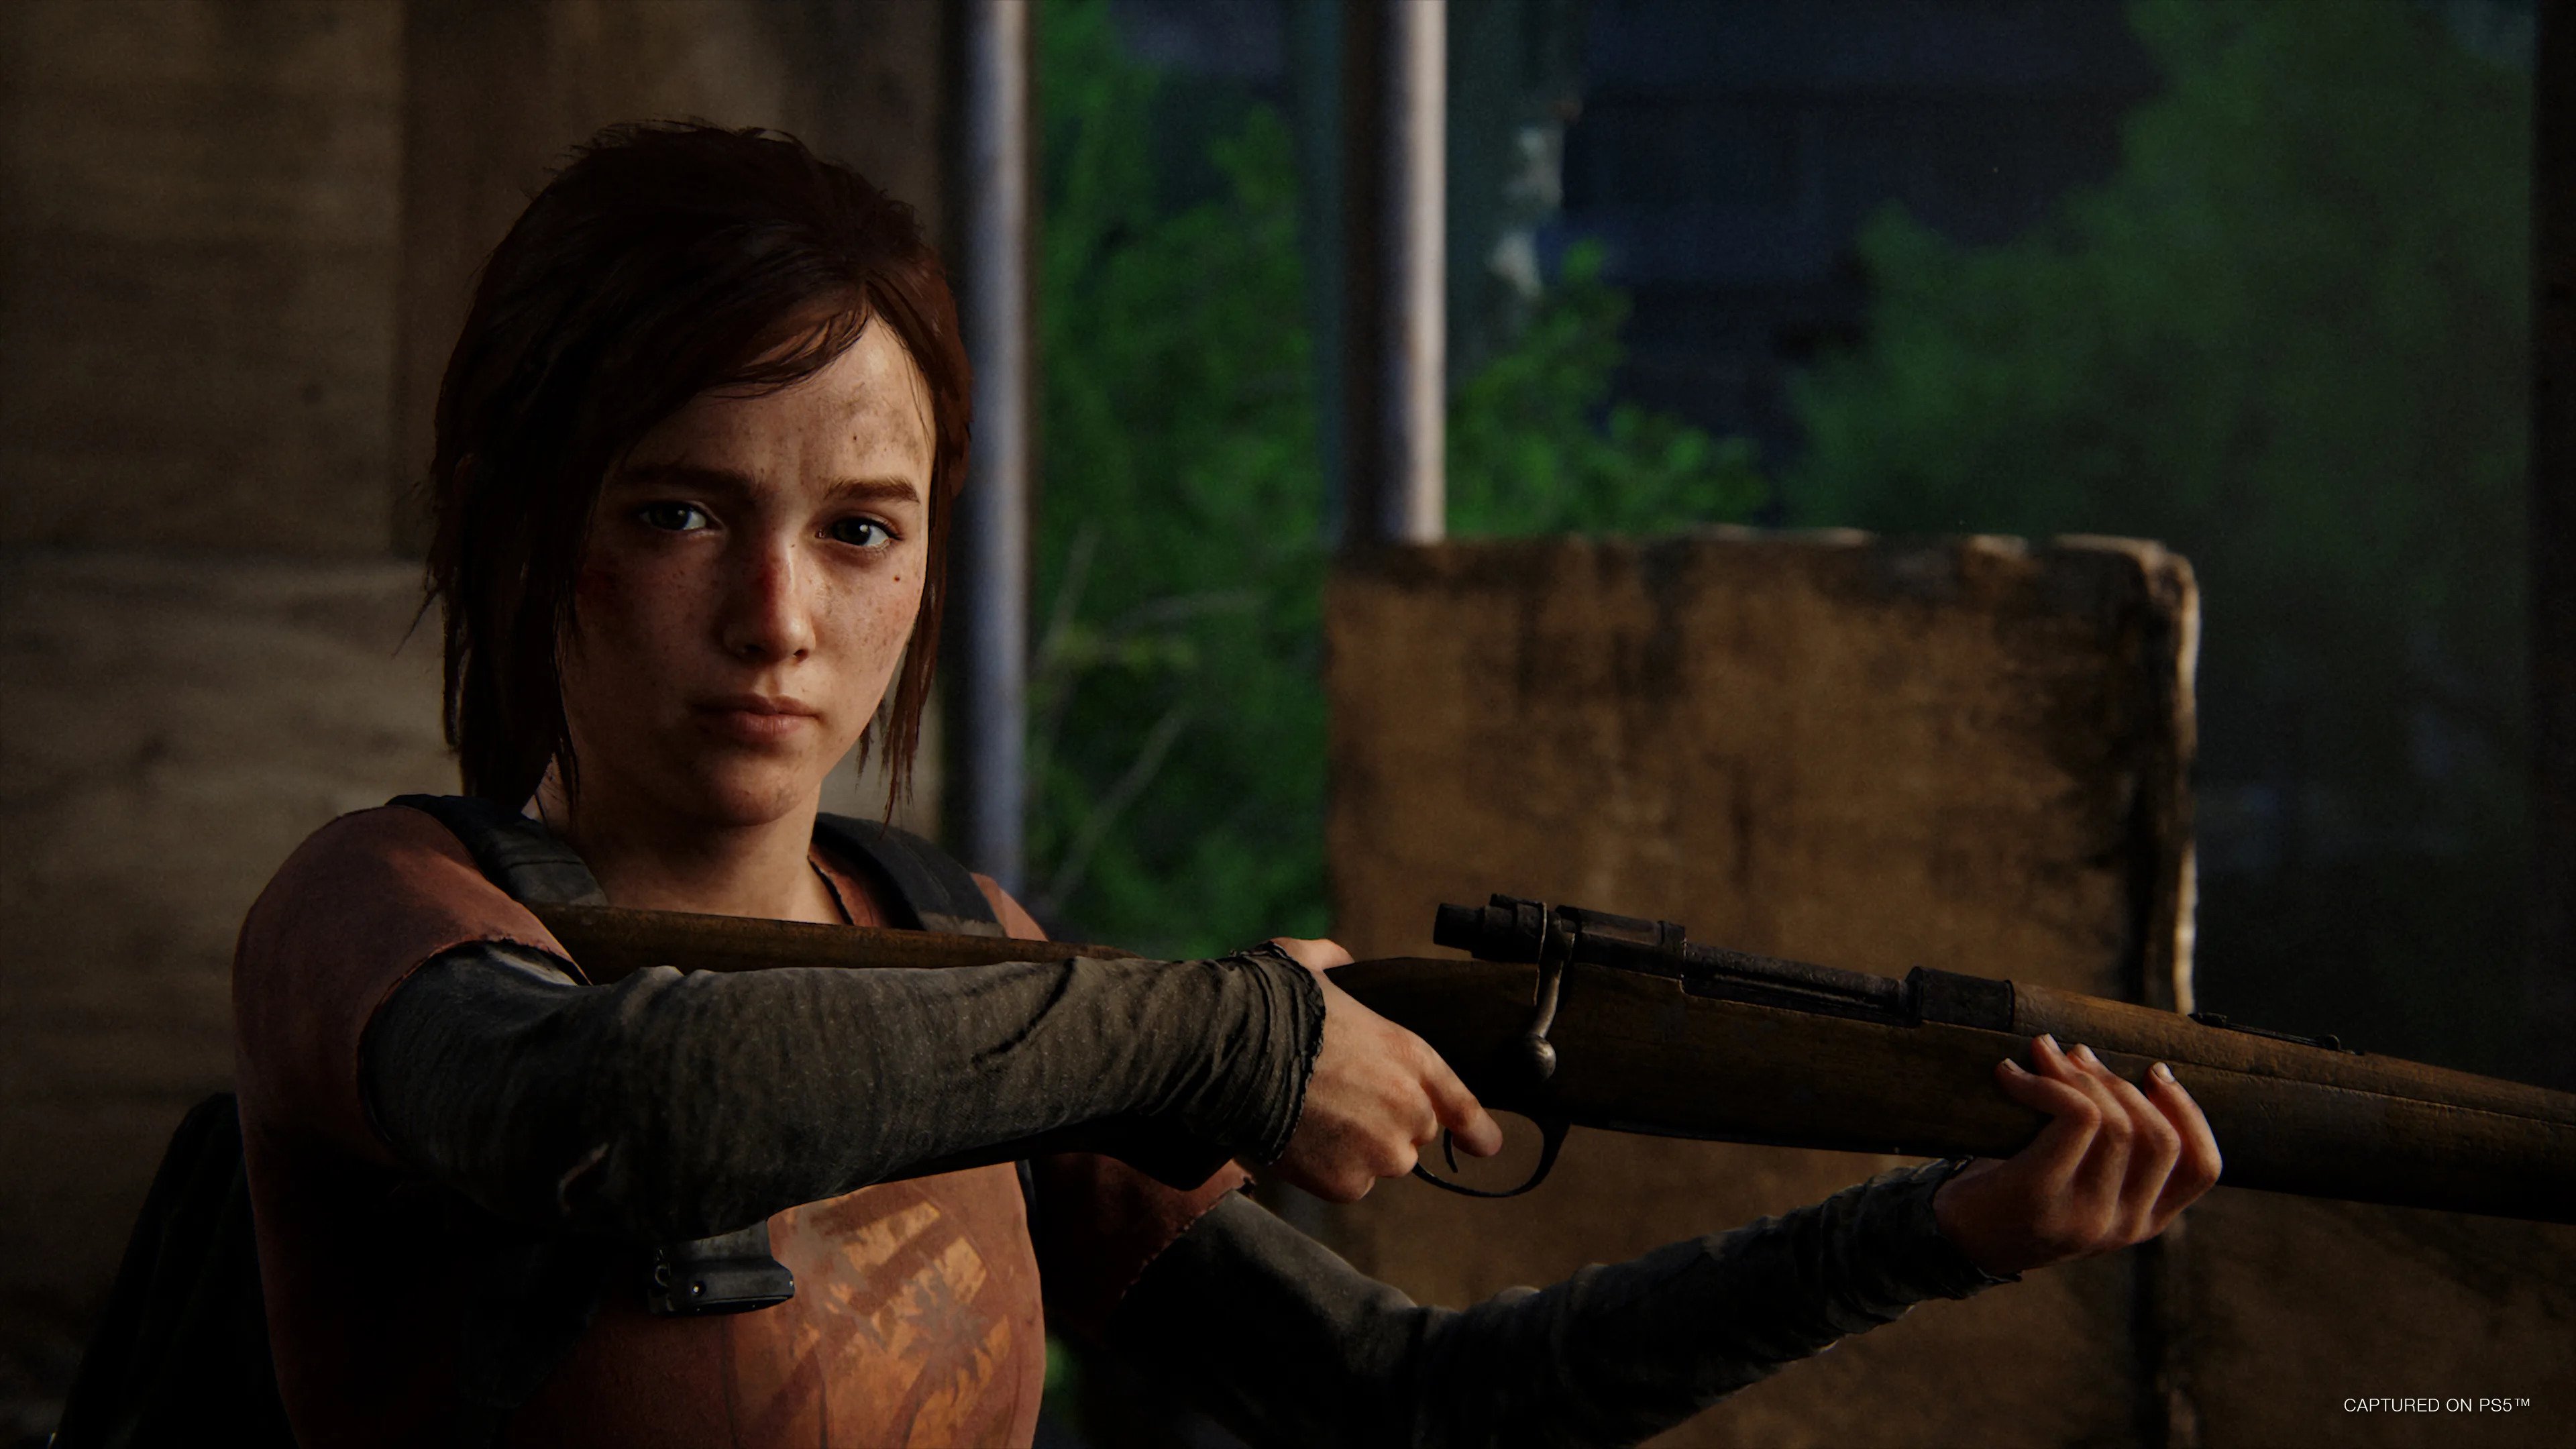 The Last of Us remake is coming to PS5 and PC in September